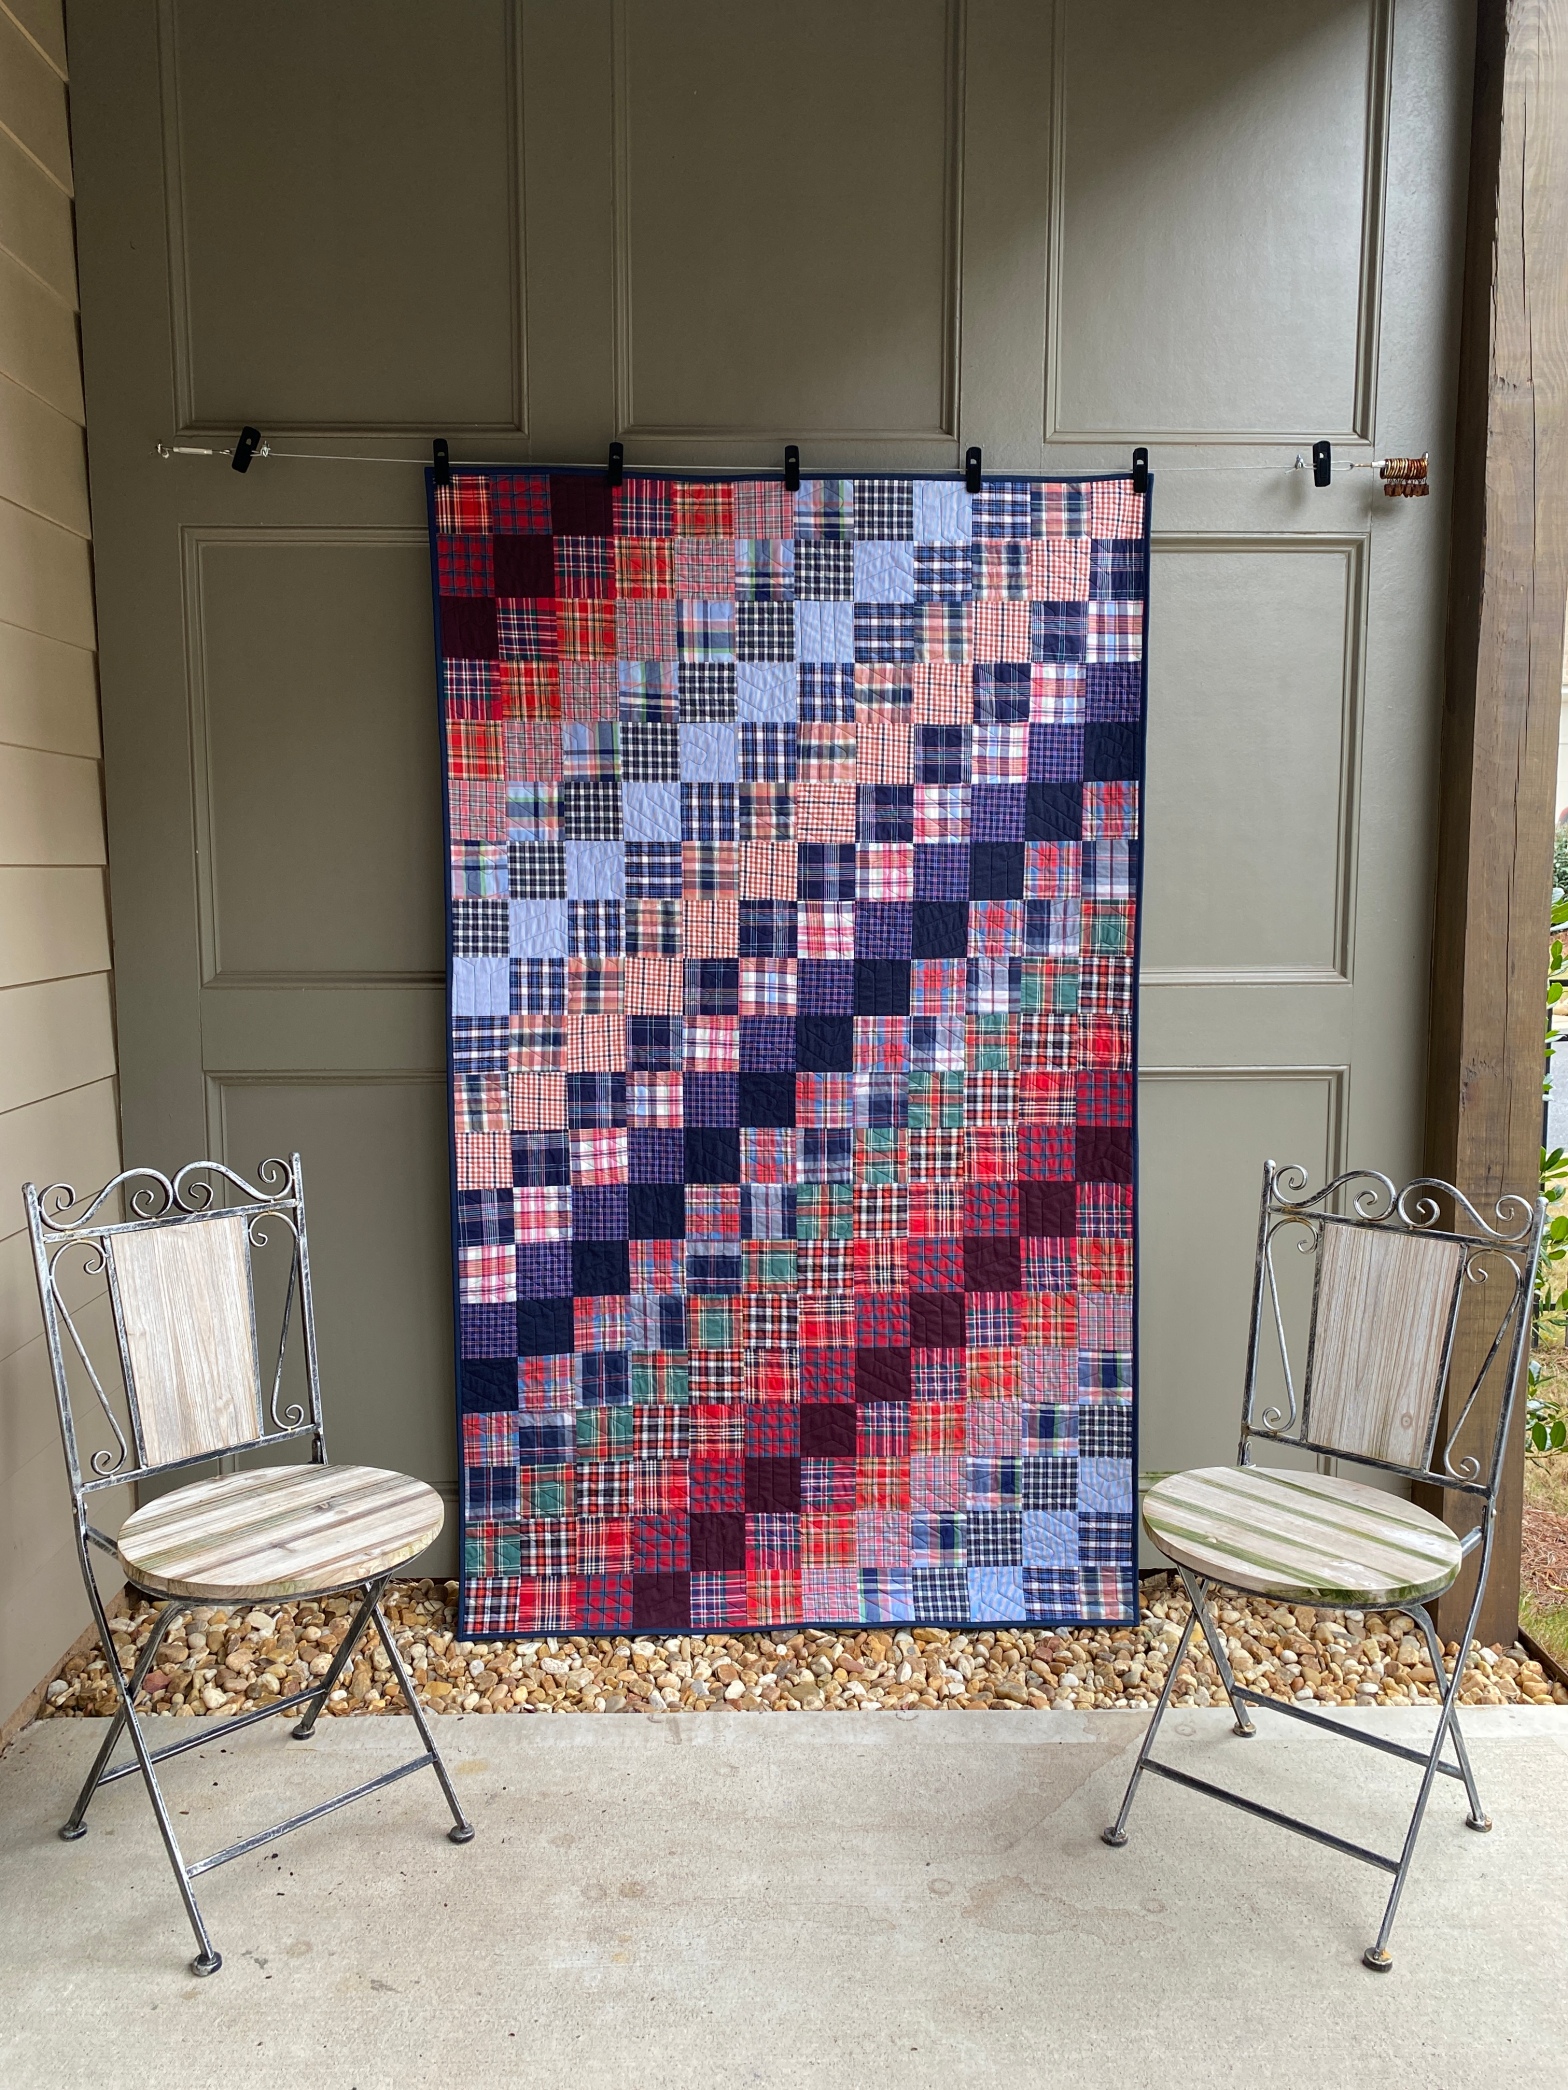 Patchwork Memorial Quilt with plaid shirts in diagonal setting